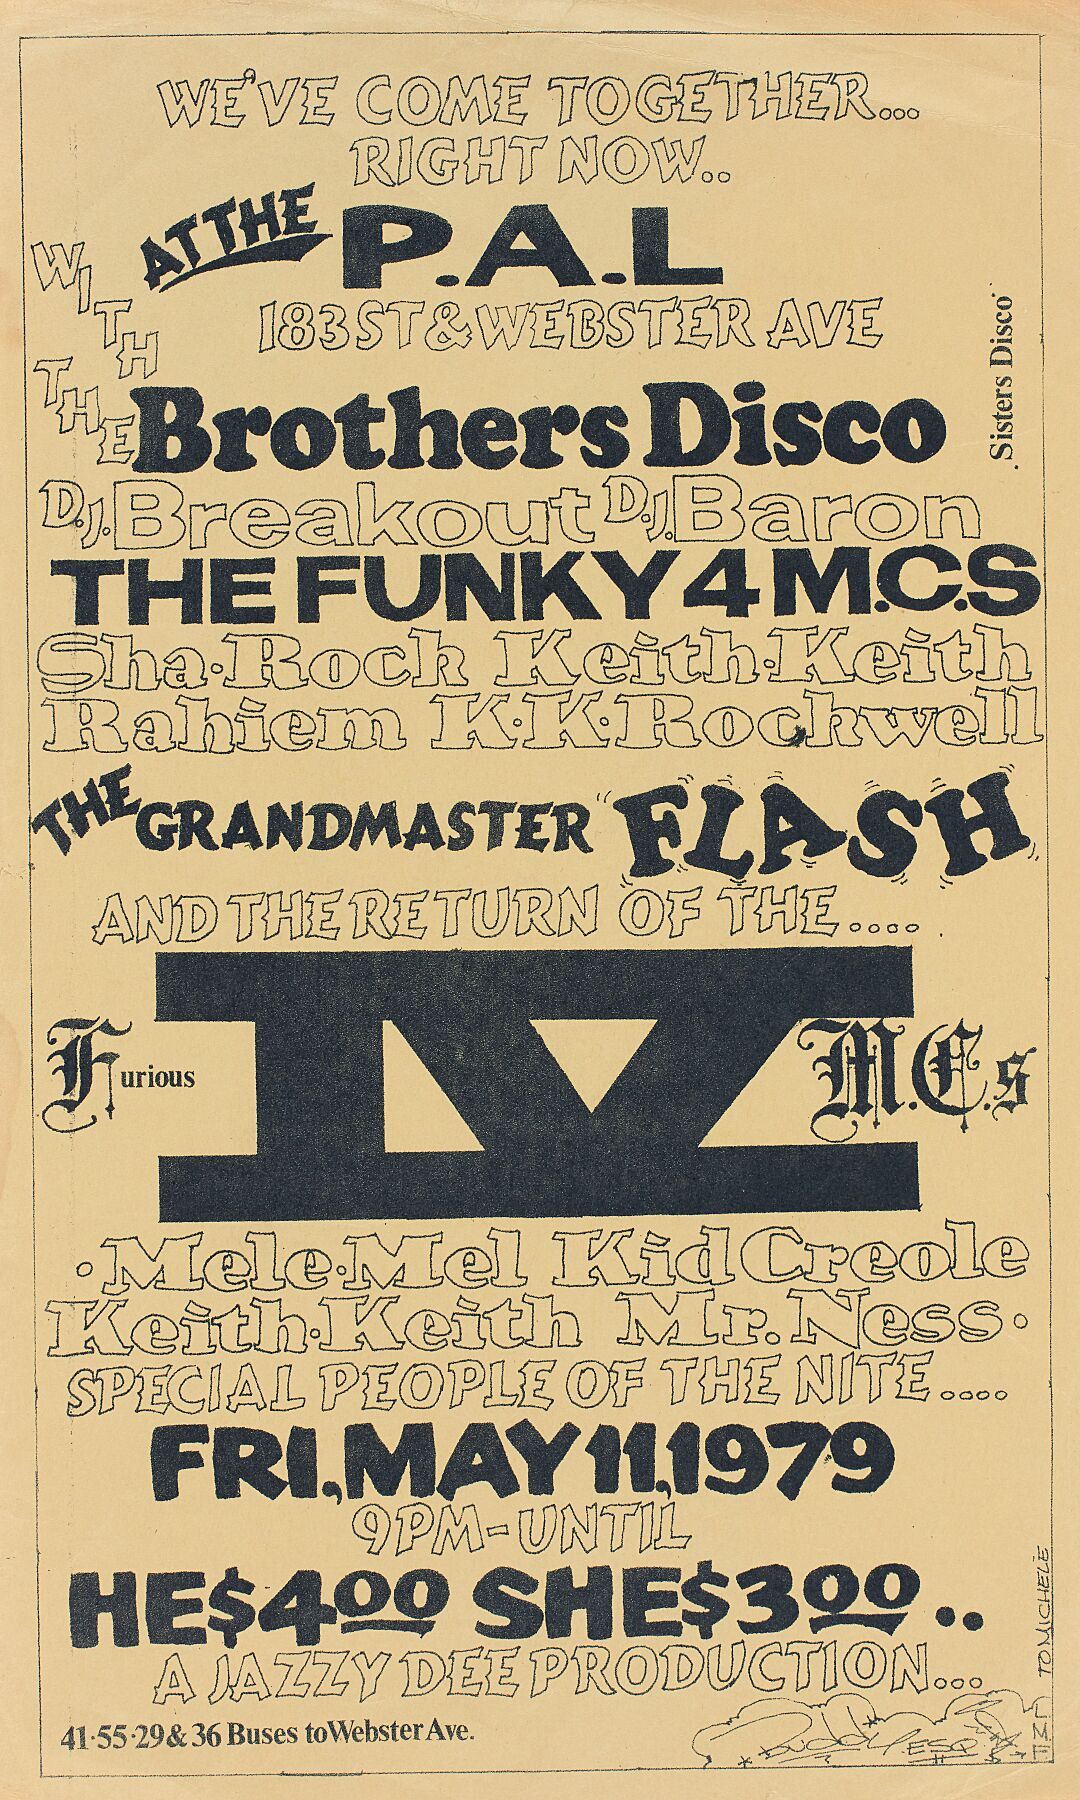 A flier advertising a rap battle at the P.A.L at 183 Street and Webster Avenue in the Bronx, New York City, on May 11, 1979, designed by Buddy Esquire (Lenoin Thompson III).